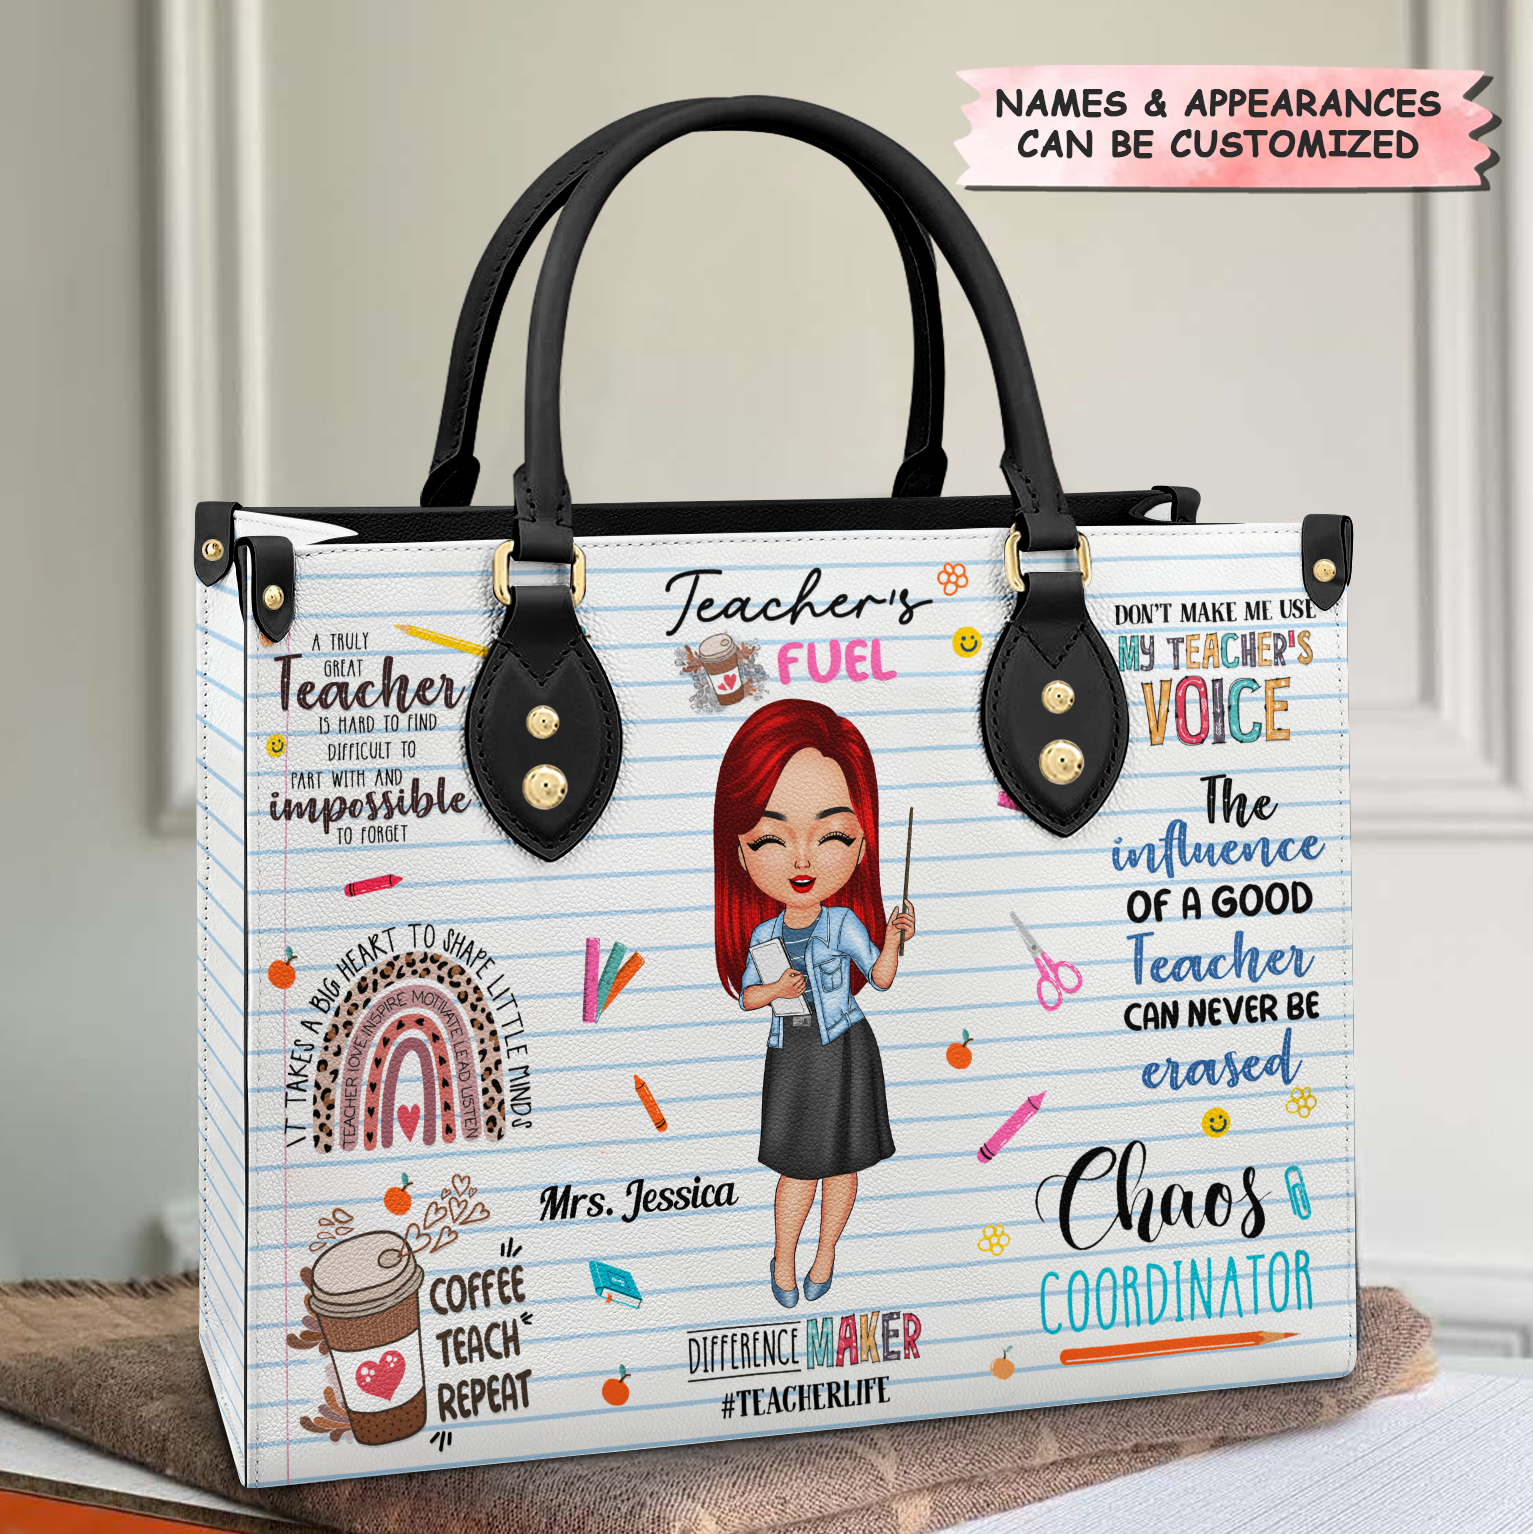 Personalized Leather Bag - Gift For Teacher - Teacher Fuel Chaos Coordinator